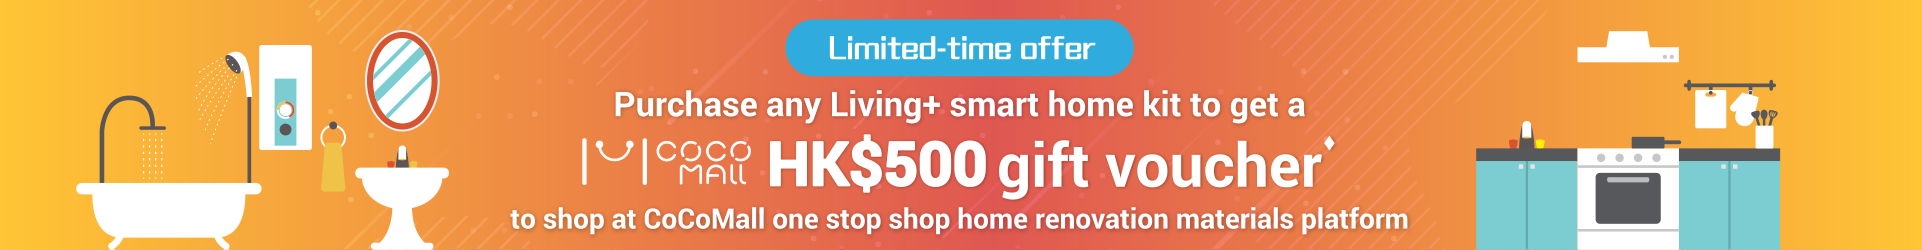 Limited-time offer Purchase any Living+ smart home kit to get a COCO MALL HK$500 gift voucher to shop at CoCoMall one stop shop home renovation materials platform